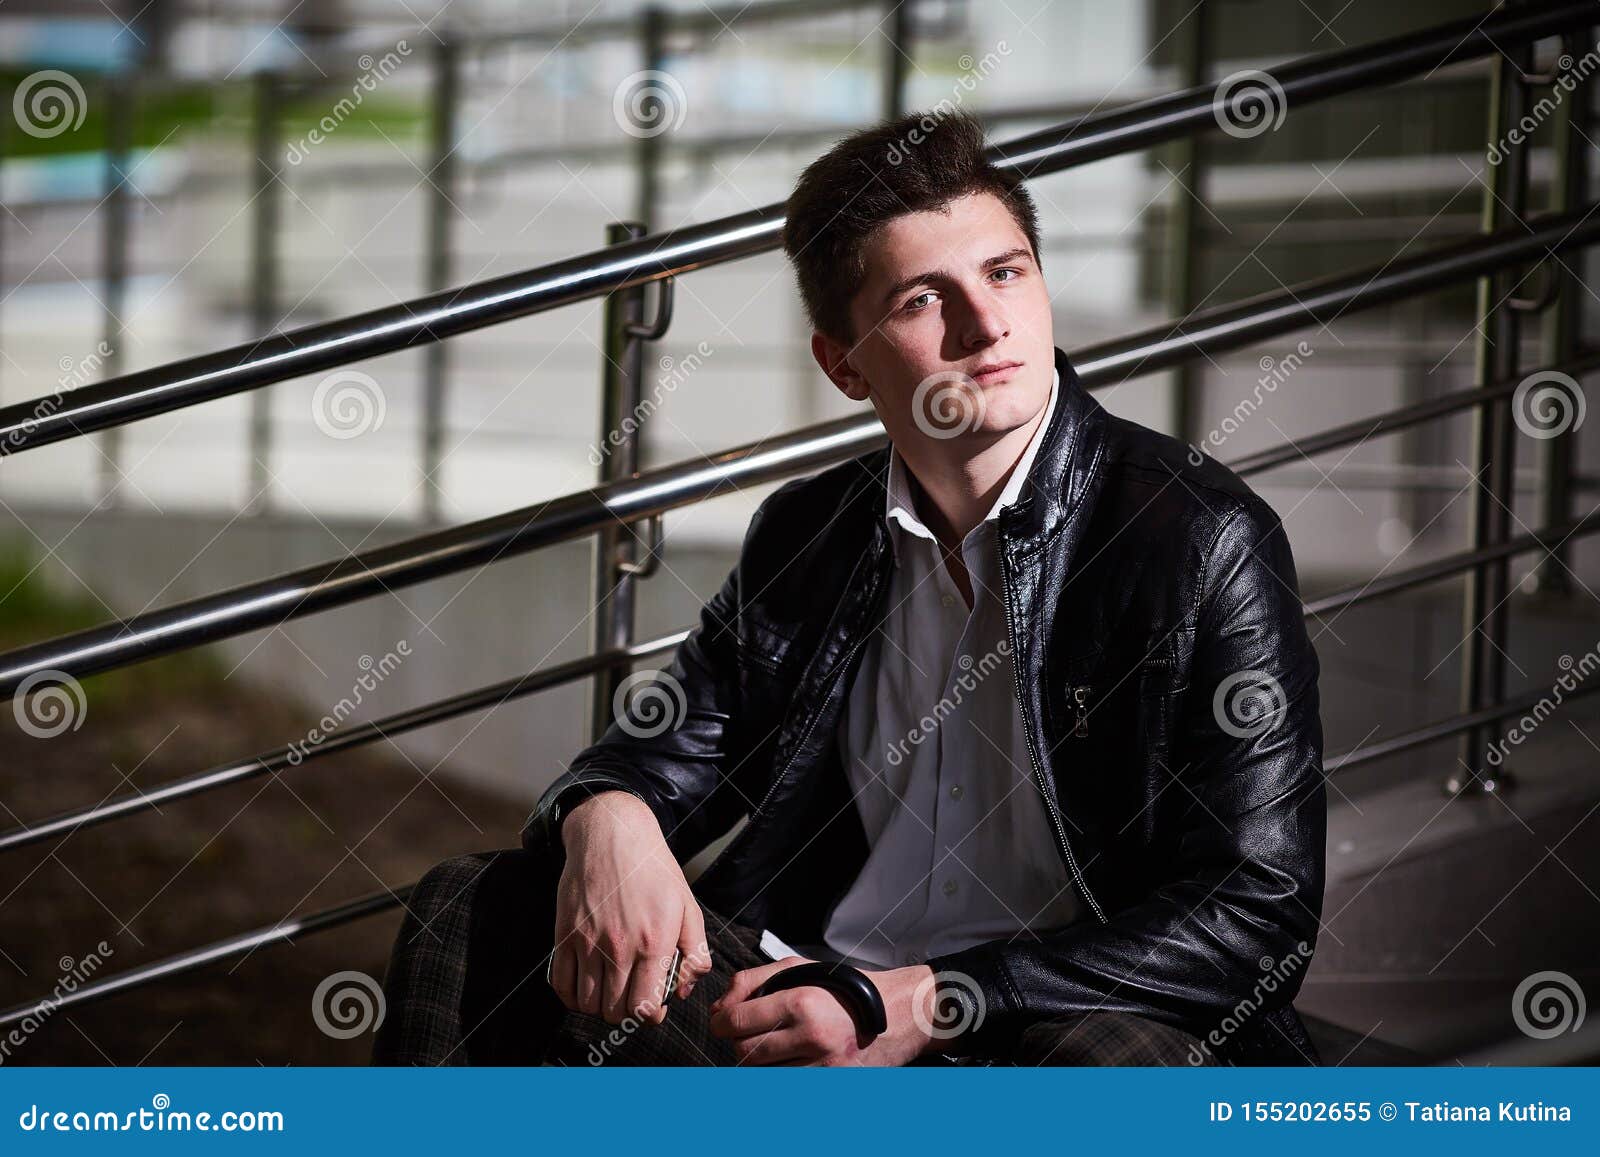 Closeup Portrait of a Serious Guy in a Leather Jacket Stock Image ...